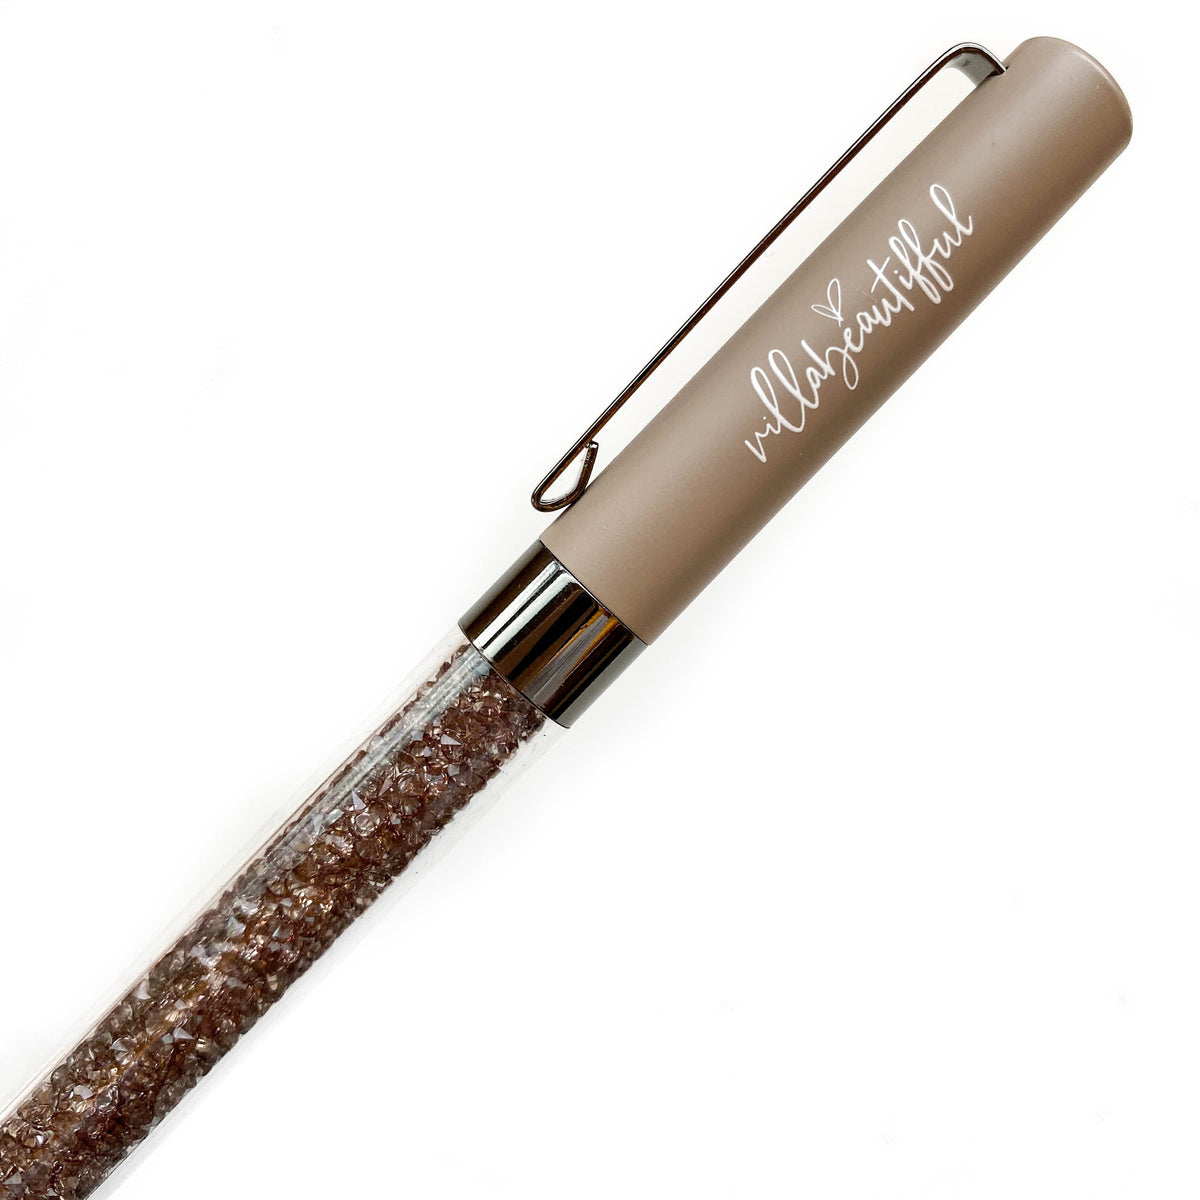 Cement Imperfect Crystal VBPen | limited pen